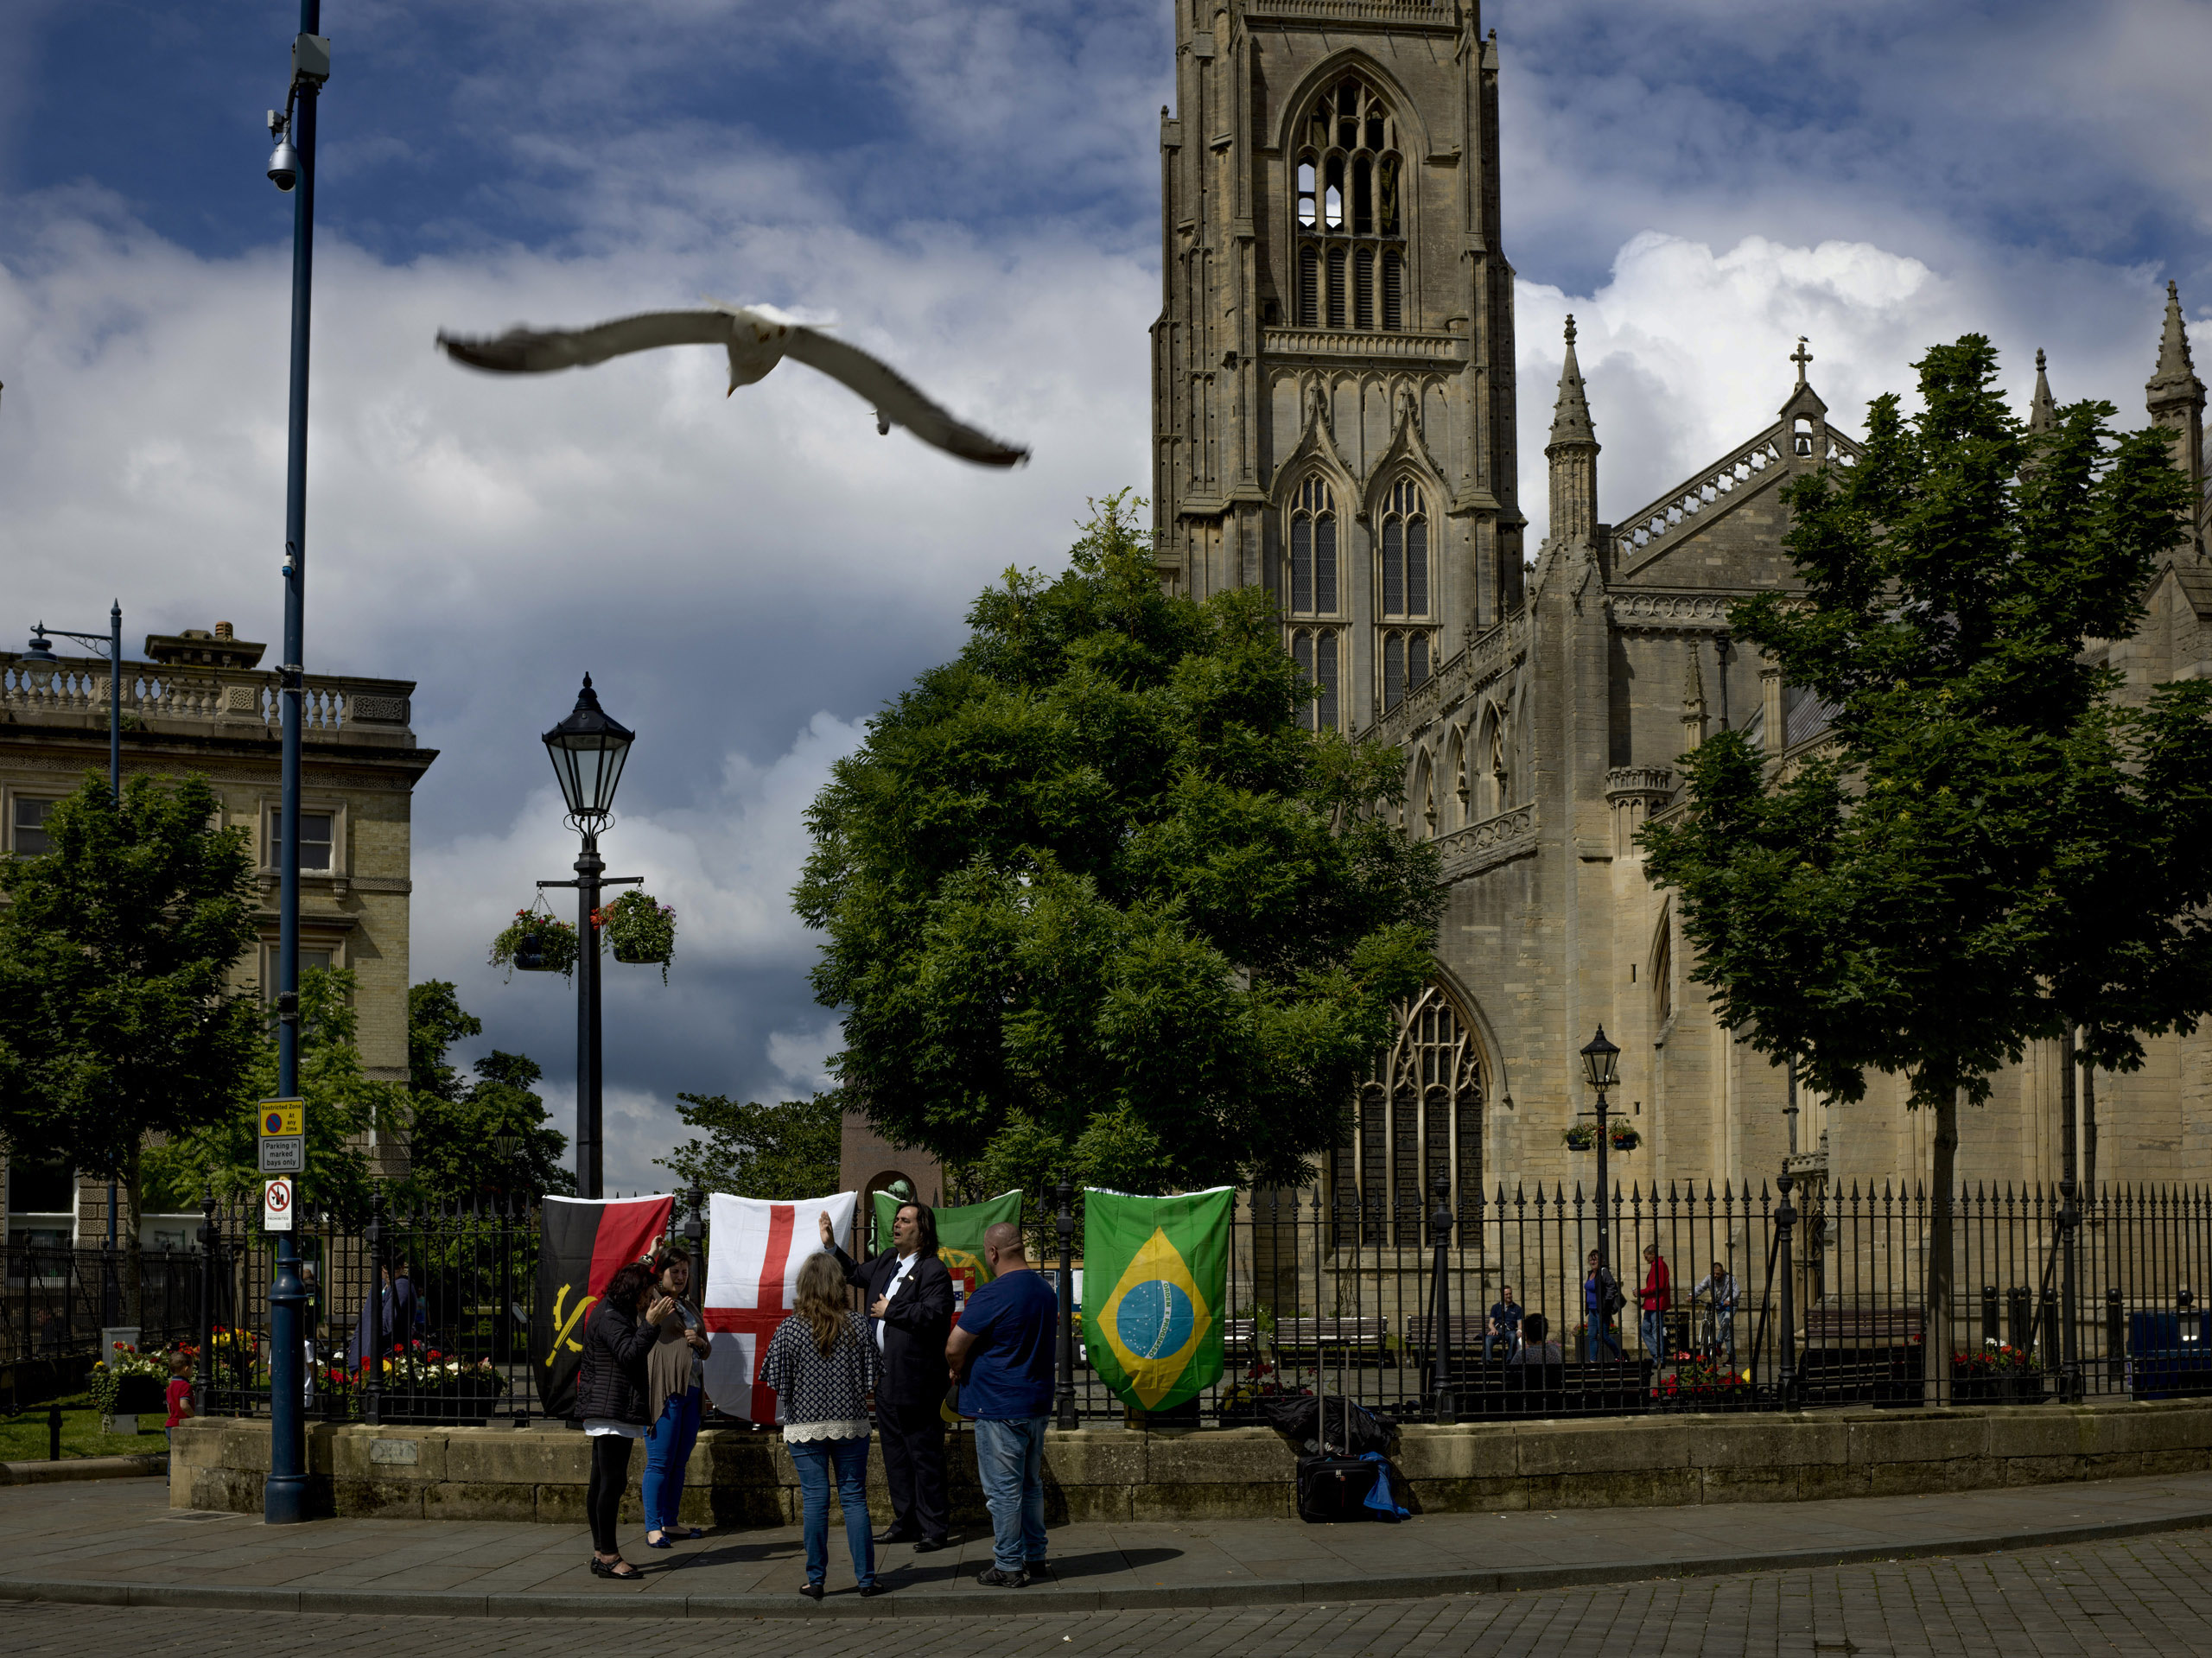 Members of a newly organized church group from Portugal and Brazil stand in Boston’s main square singing prayers. Boston, Lincolnshire, June 26, 2016.